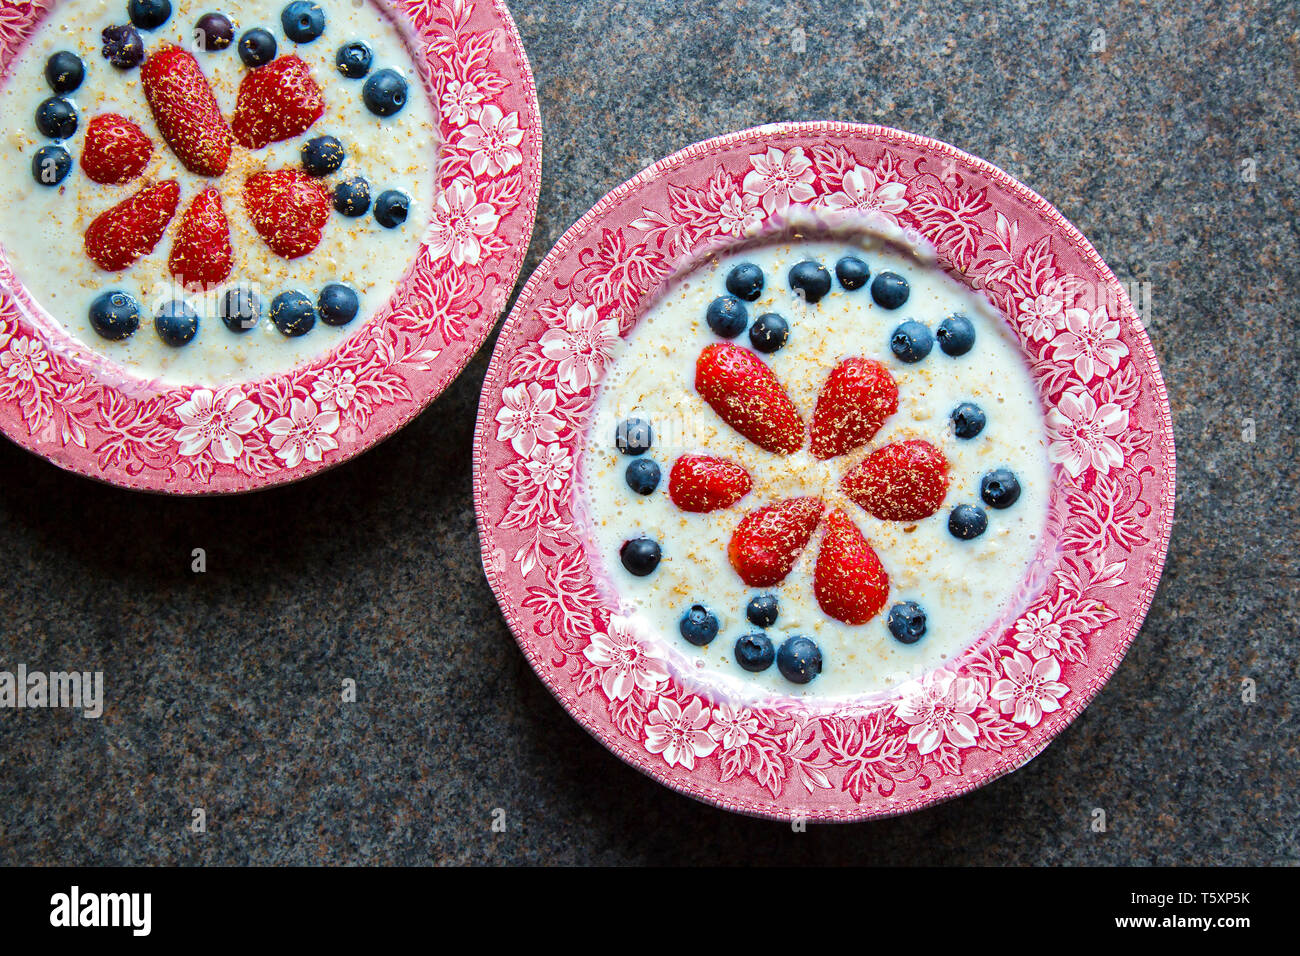 UK breakfast cereal being served: ceramic traditional dishes of oatmeal porridge decorated with fresh fruit, strawberries & blueberries. Stock Photo